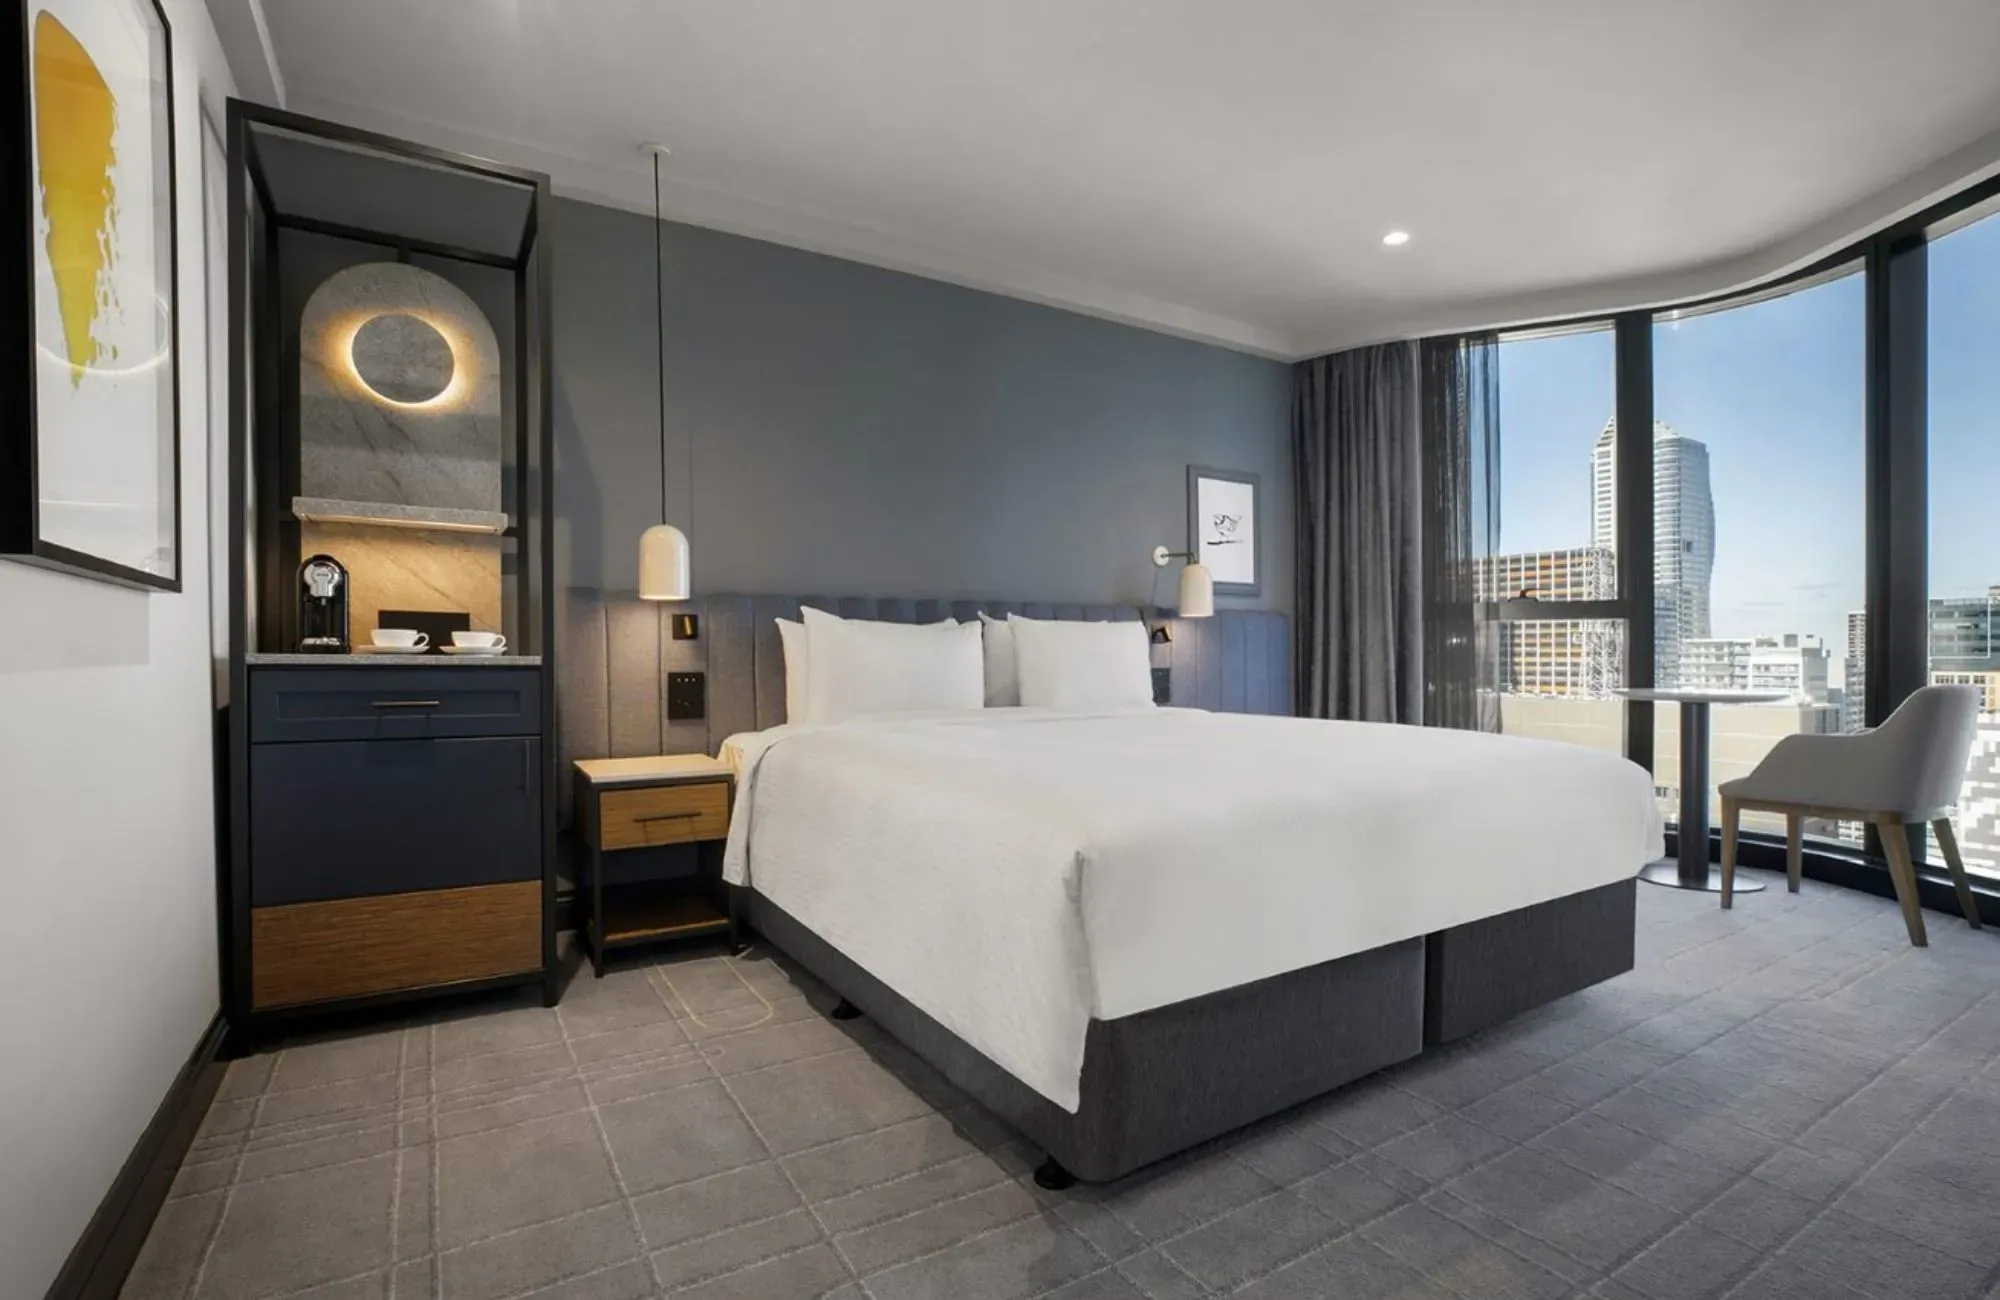 Voco Melbourne Central by IHG Hotels & Resorts. Guest rooms